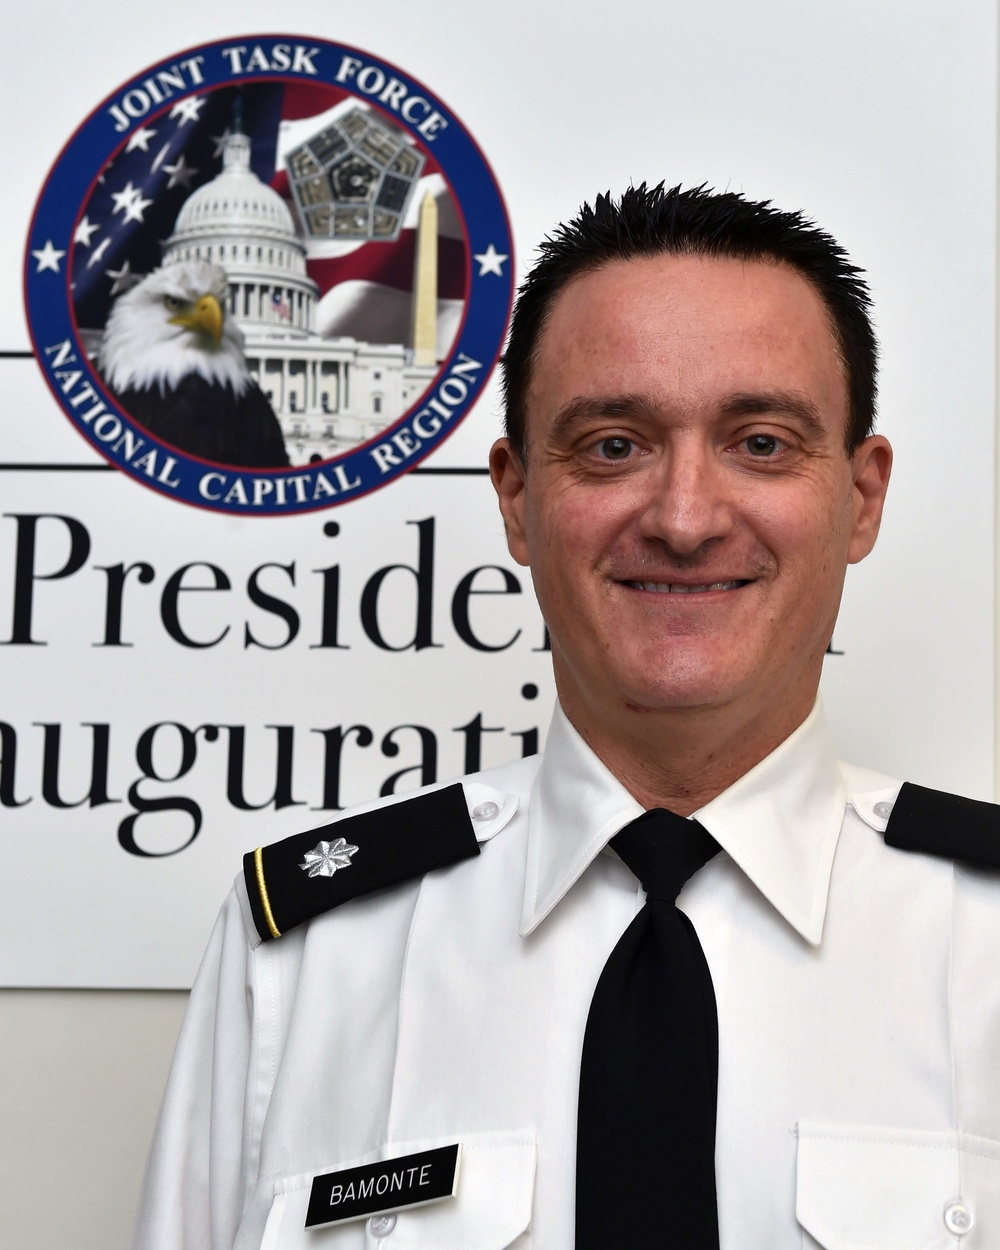 Army Lieutenant Colonel Bamonte supports the 58th Presidential Inauguration